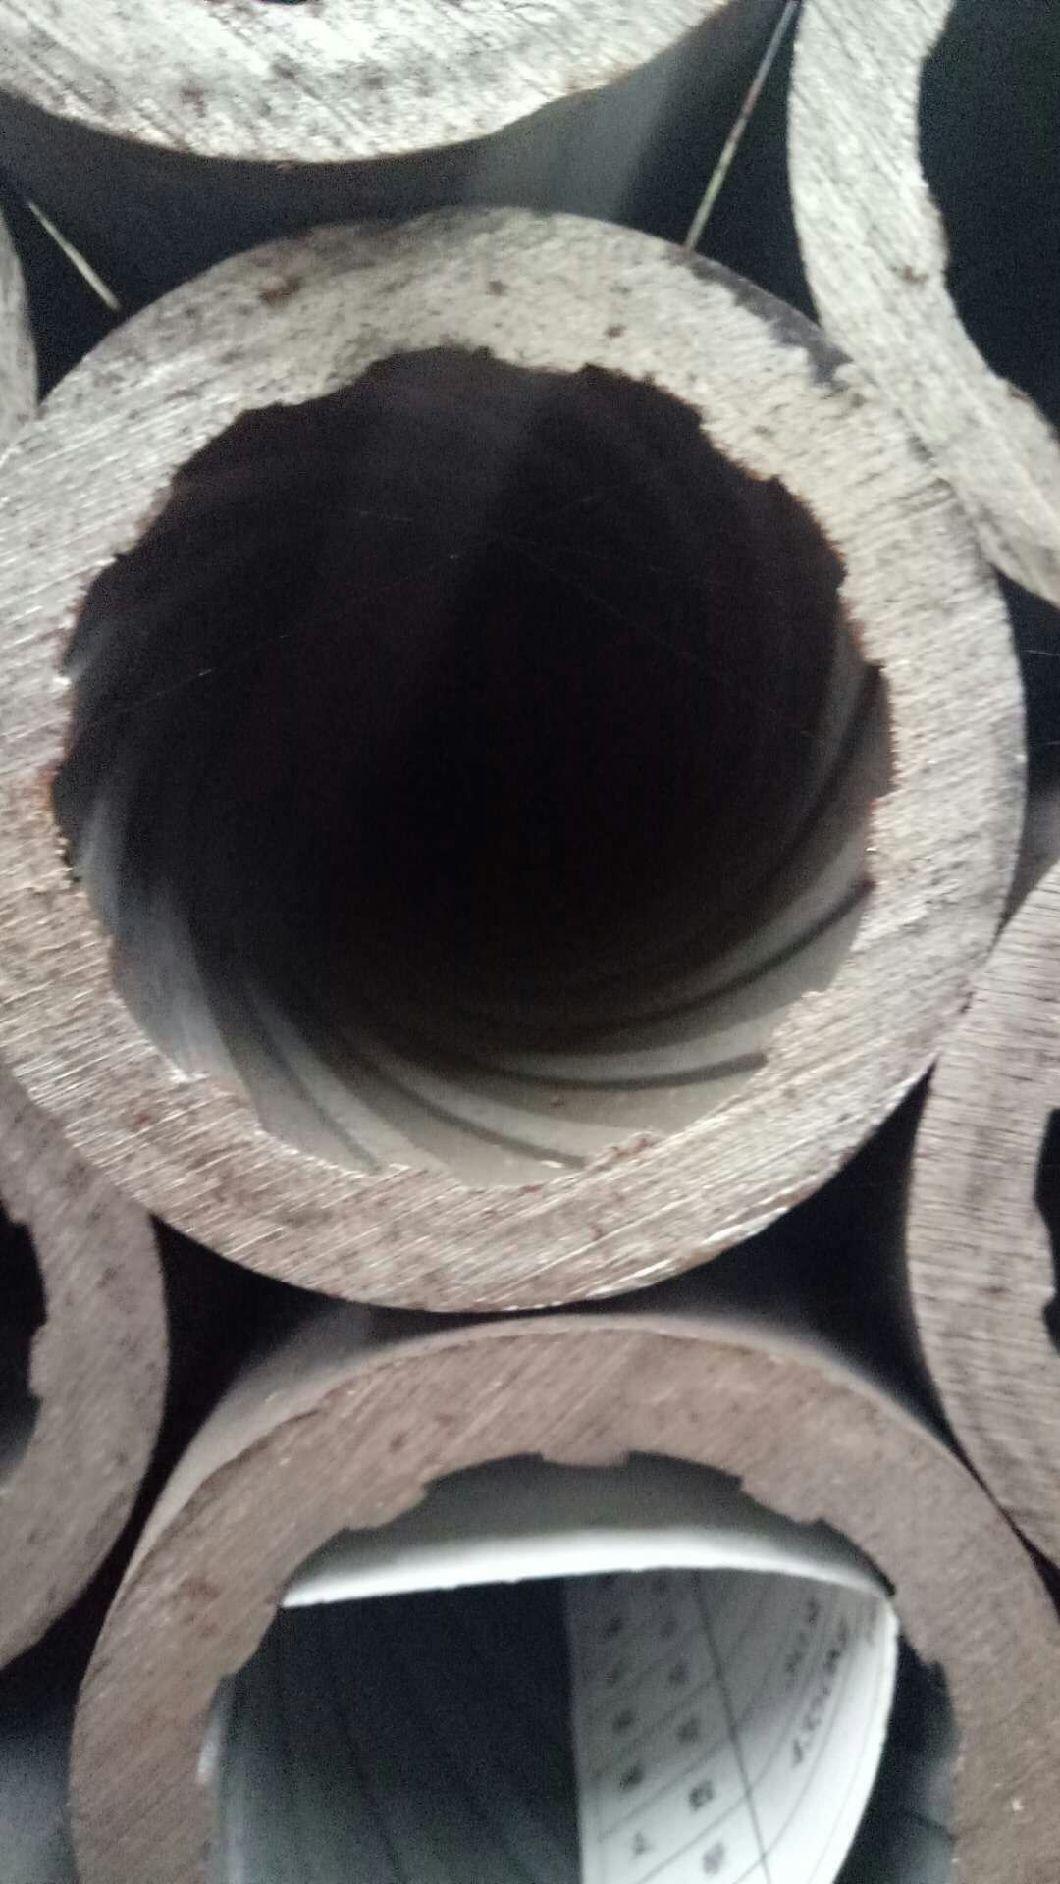 Supply ASTM SA213-T12 Seamless Pipe with Internal Thread/SA213-T12 Seamless Tube with Internal Thread